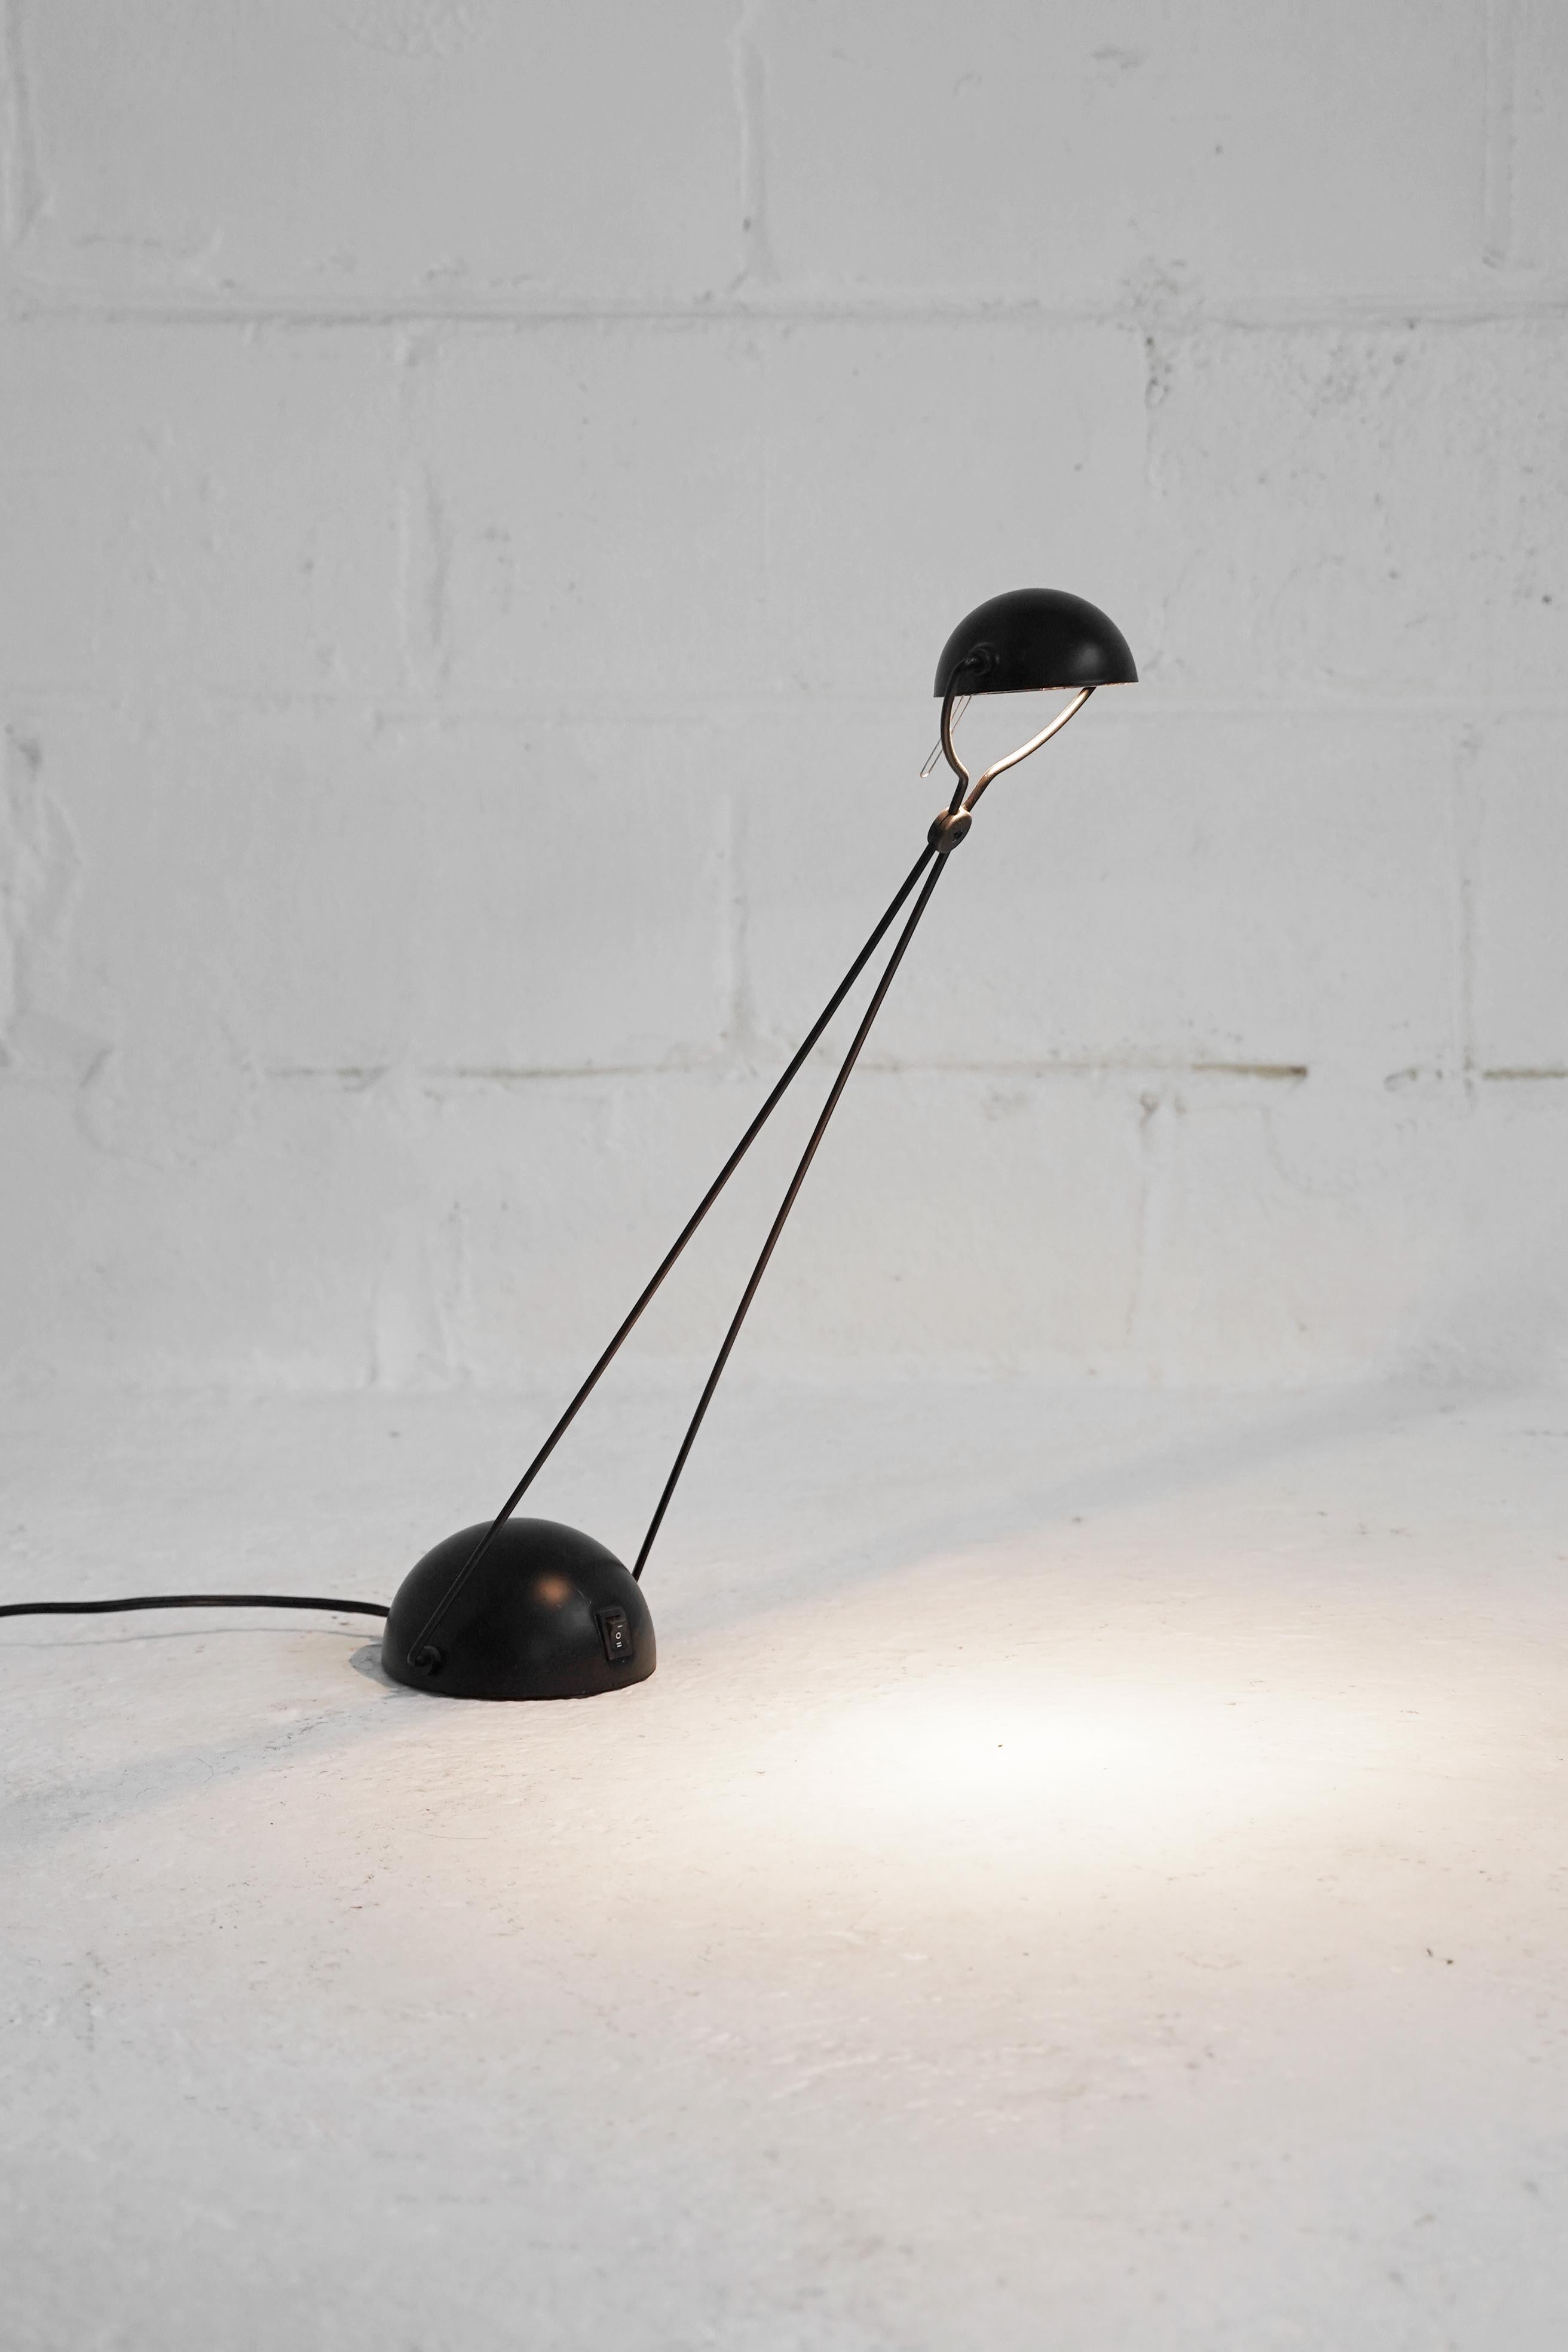 Minimal and elegant counterweight halogen table wall lamp designed in the style of Paolo Francesco Piva for Stephano Cevoli. We have one in a brass and black finish. In working condition.